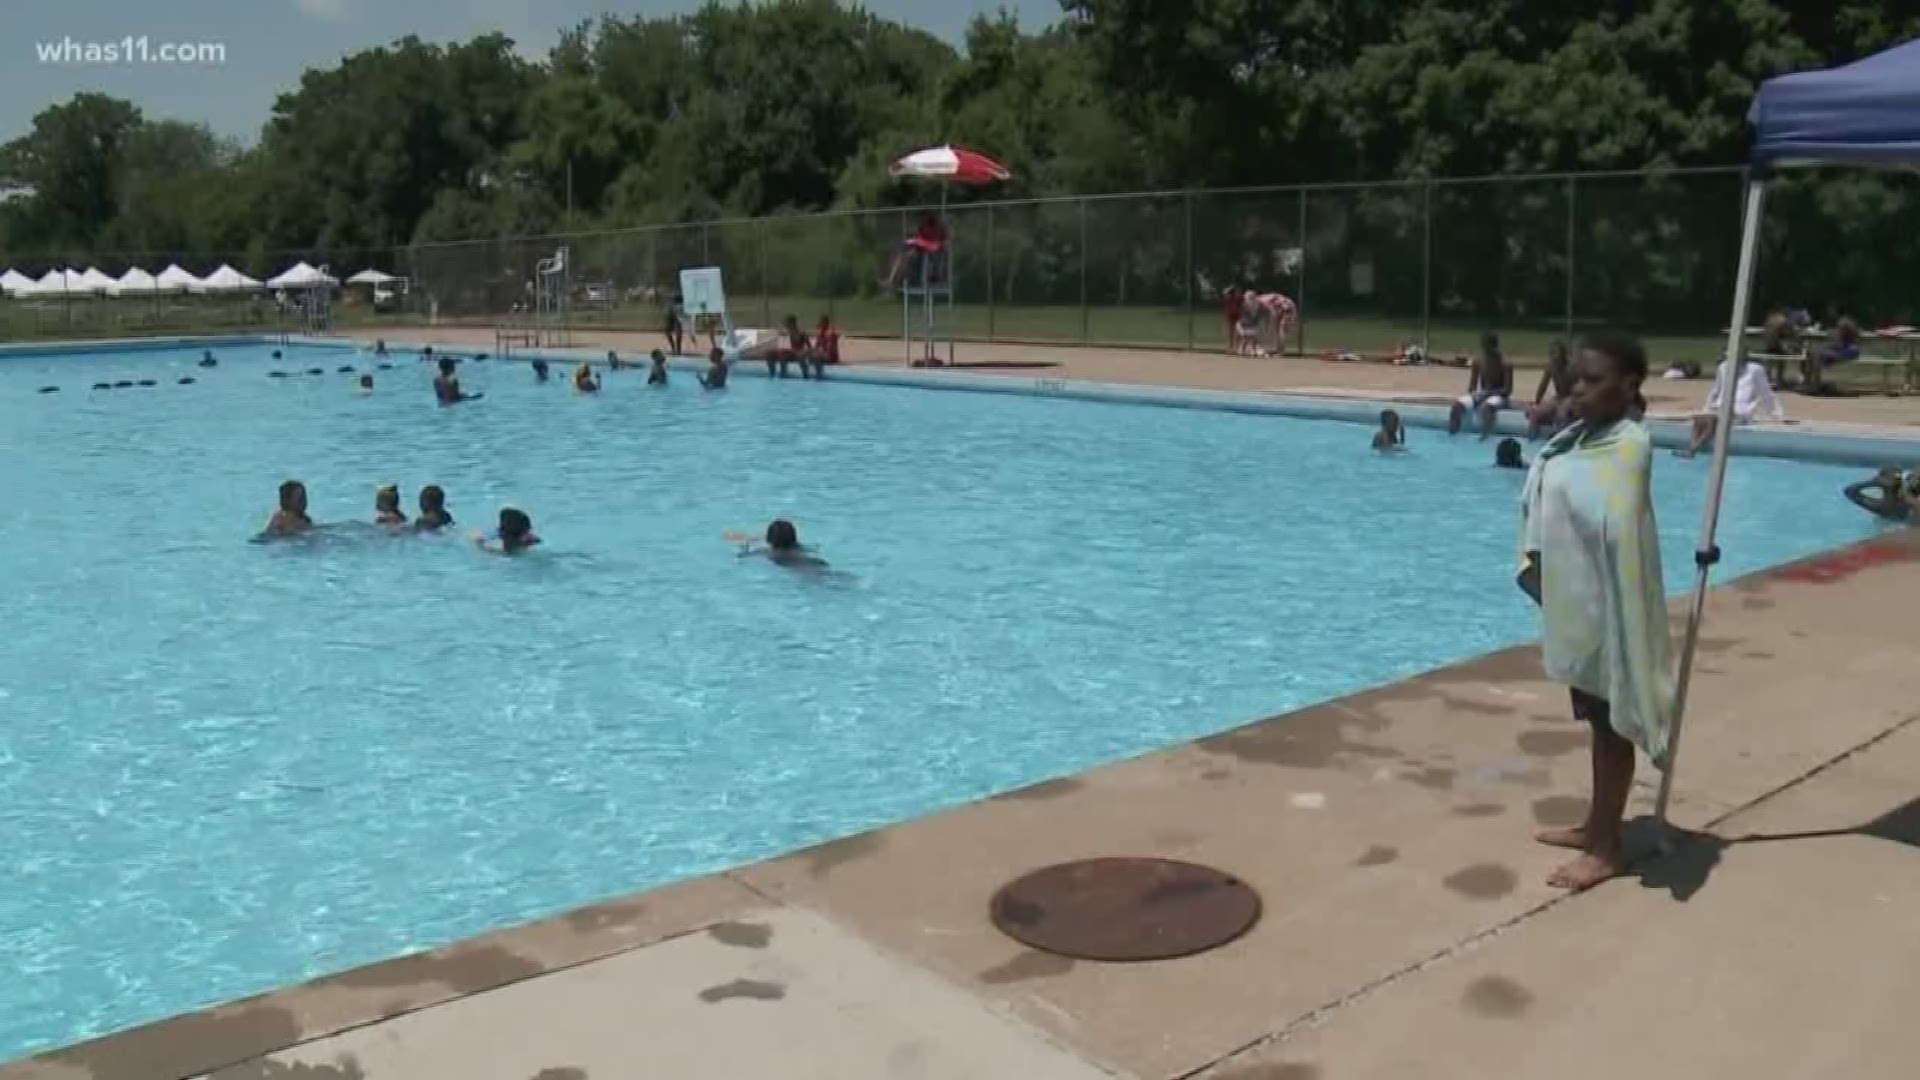 Summer means pool time, but four of Louisville's pools won't be opening to the public due to the budget gap.